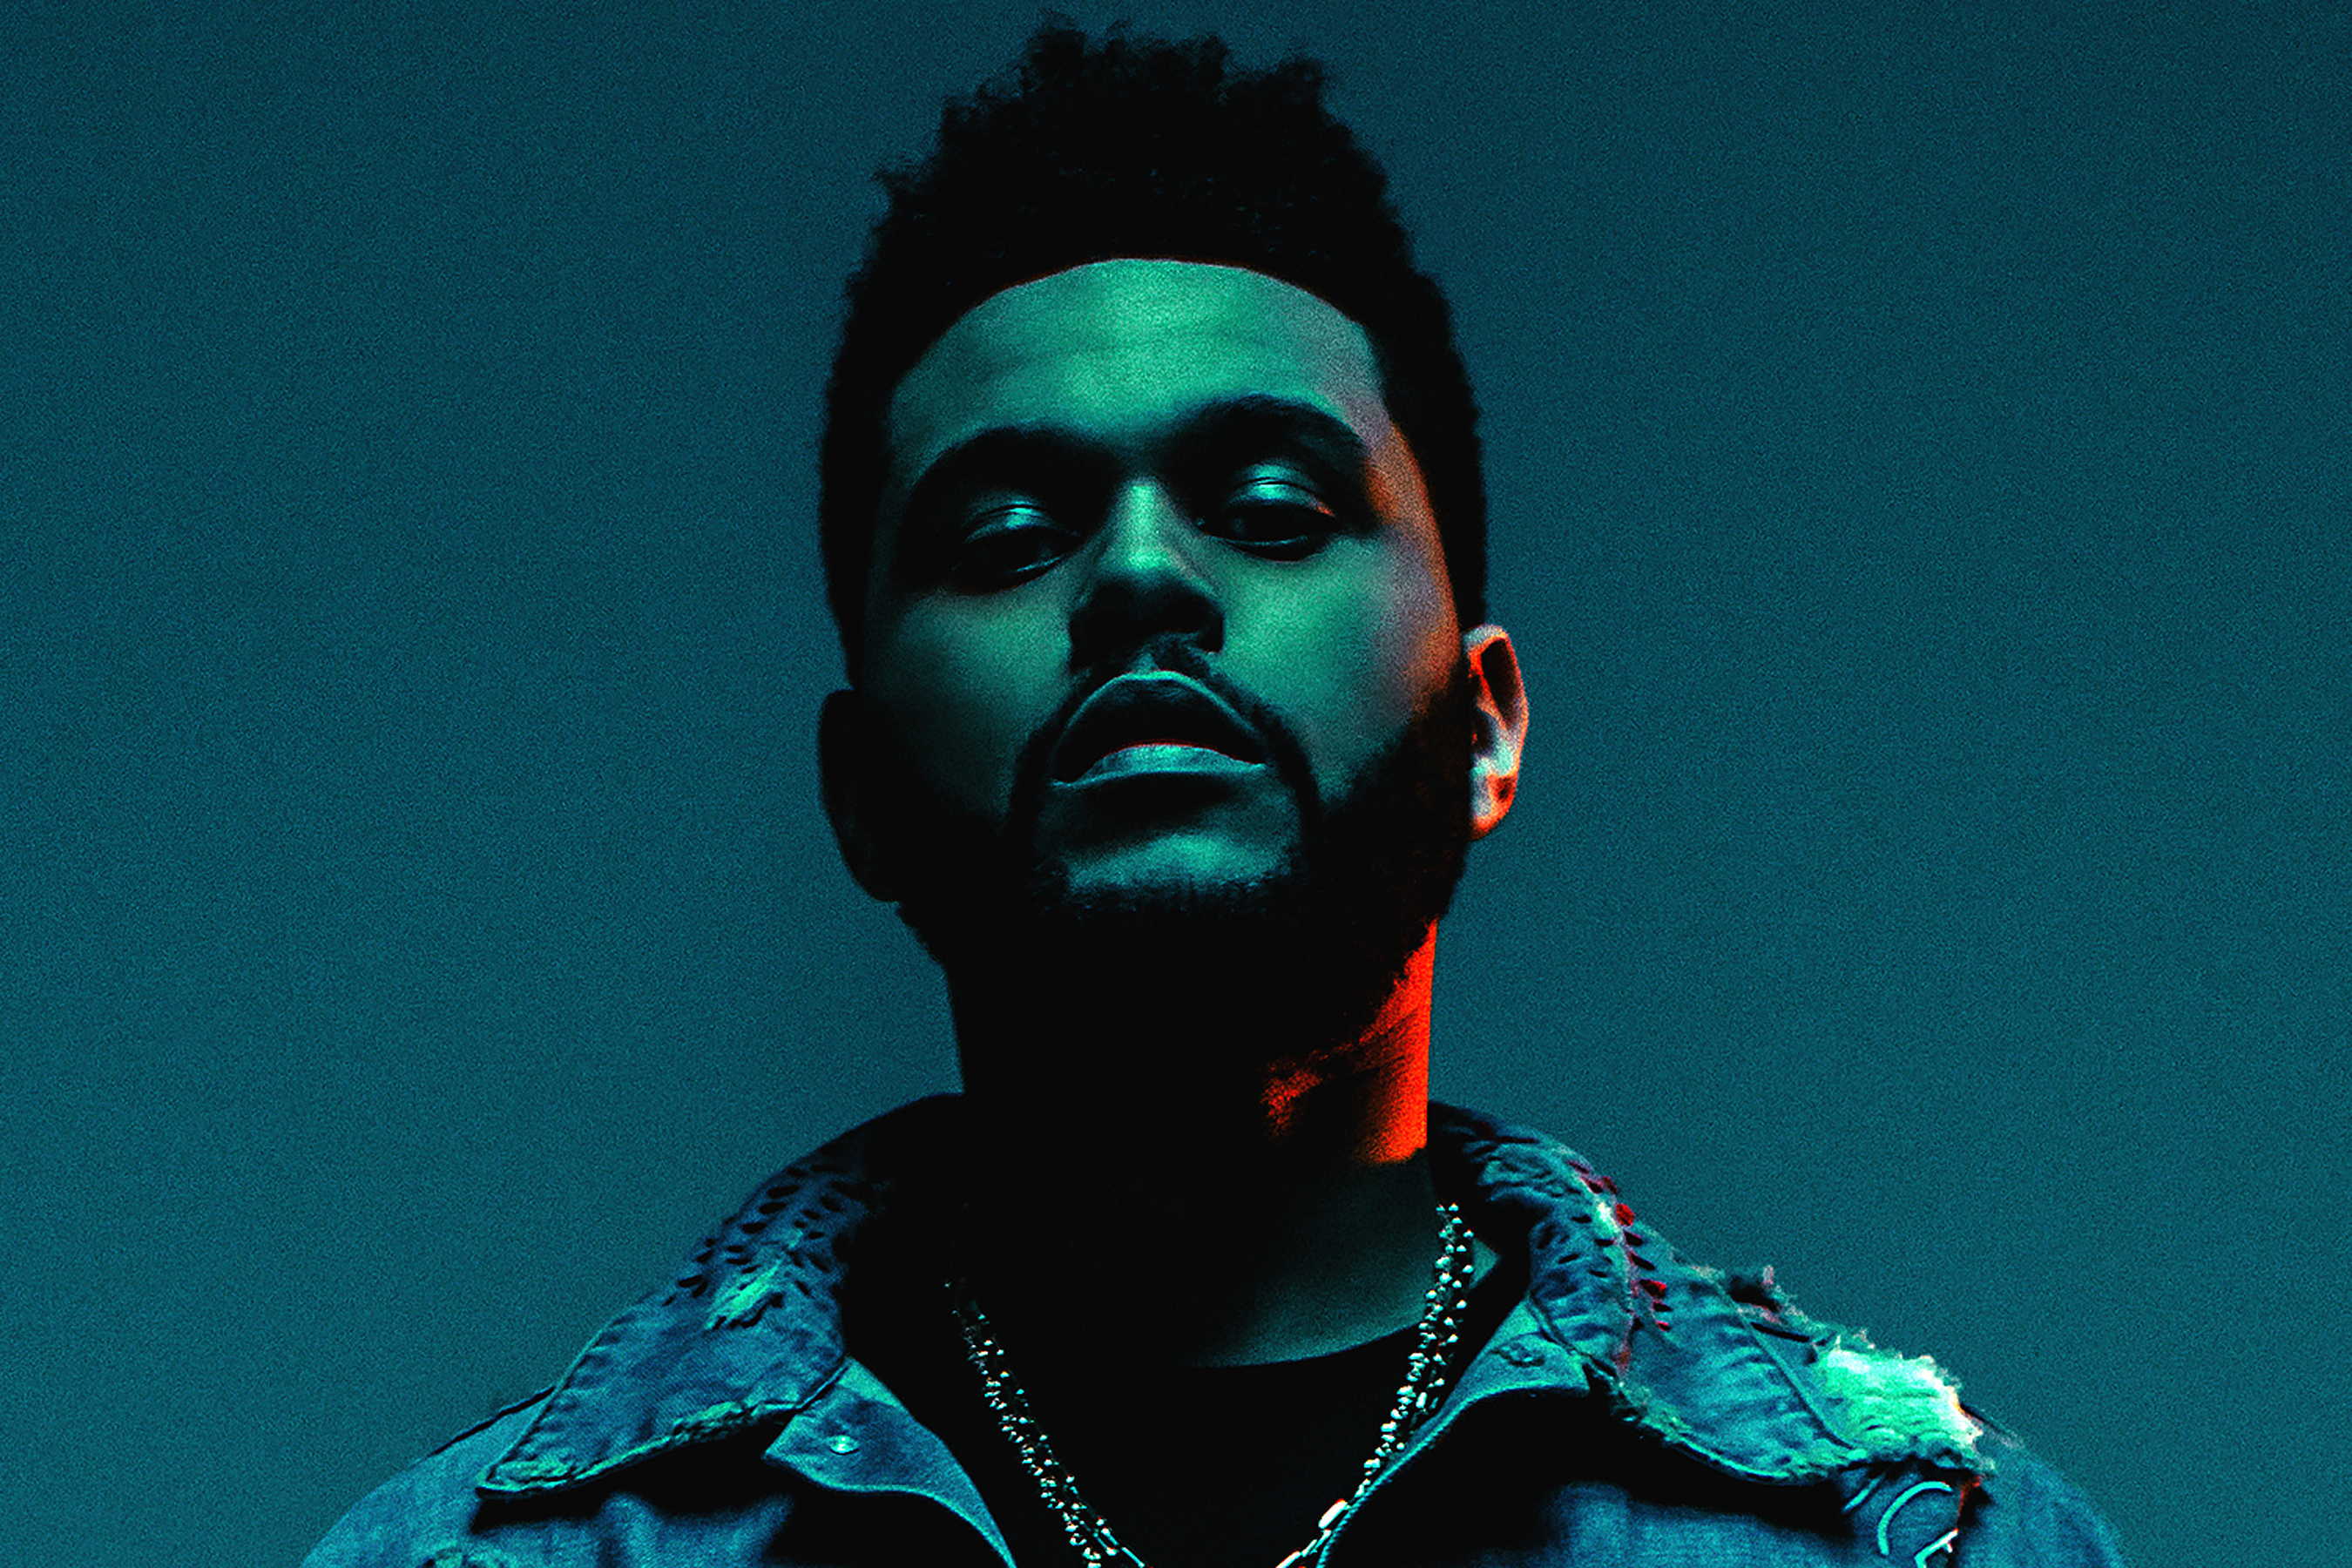 Live for the weekend. The Weeknd. Певец the Weeknd. Эйбел Макконен Тесфайе. Abel the Weeknd.